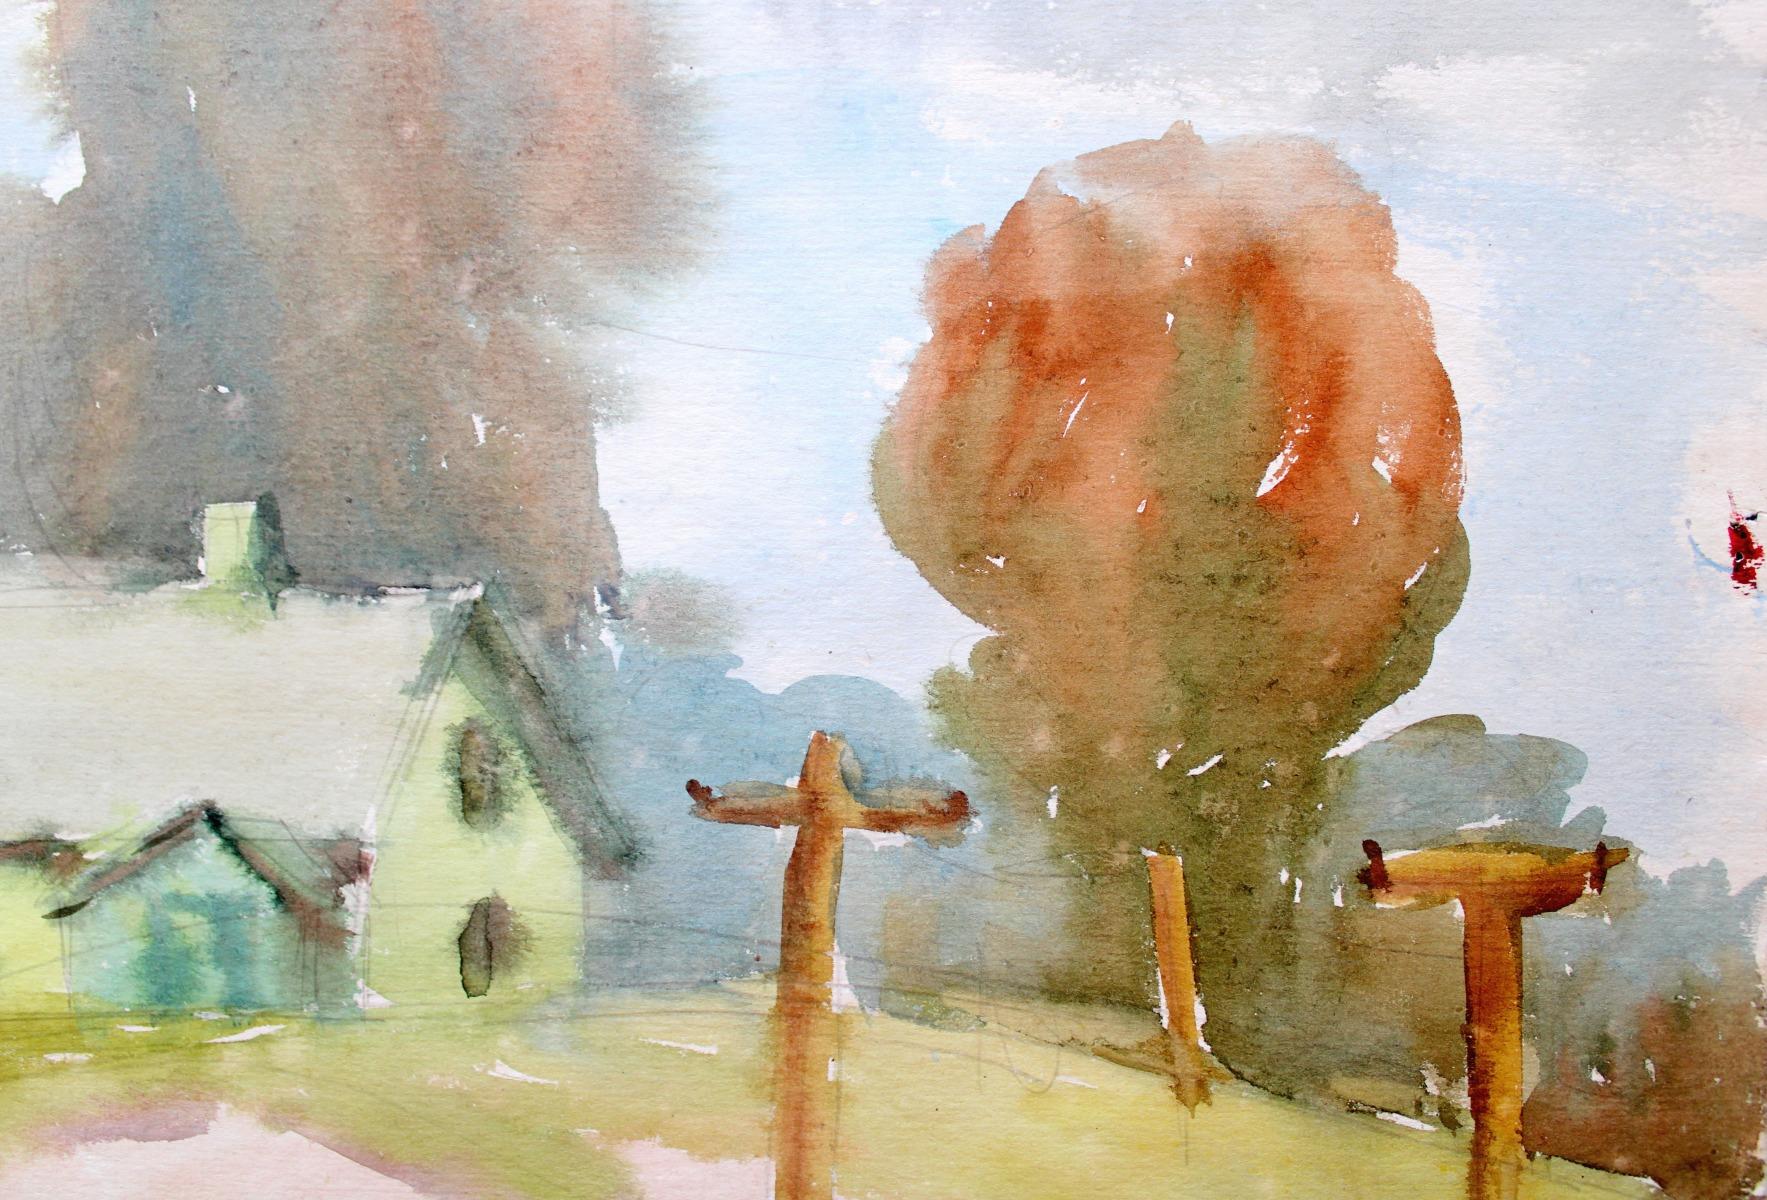 Rural landscape. Paper, watercolor, 30x41.5 cm

Dzidra Ezergaile (1926-2013)
Born in Riga. School years alternate with summer work in the countryside. In 1947, she began her studies at the Faculty of Architecture of LVU, but in 1951 she transferred